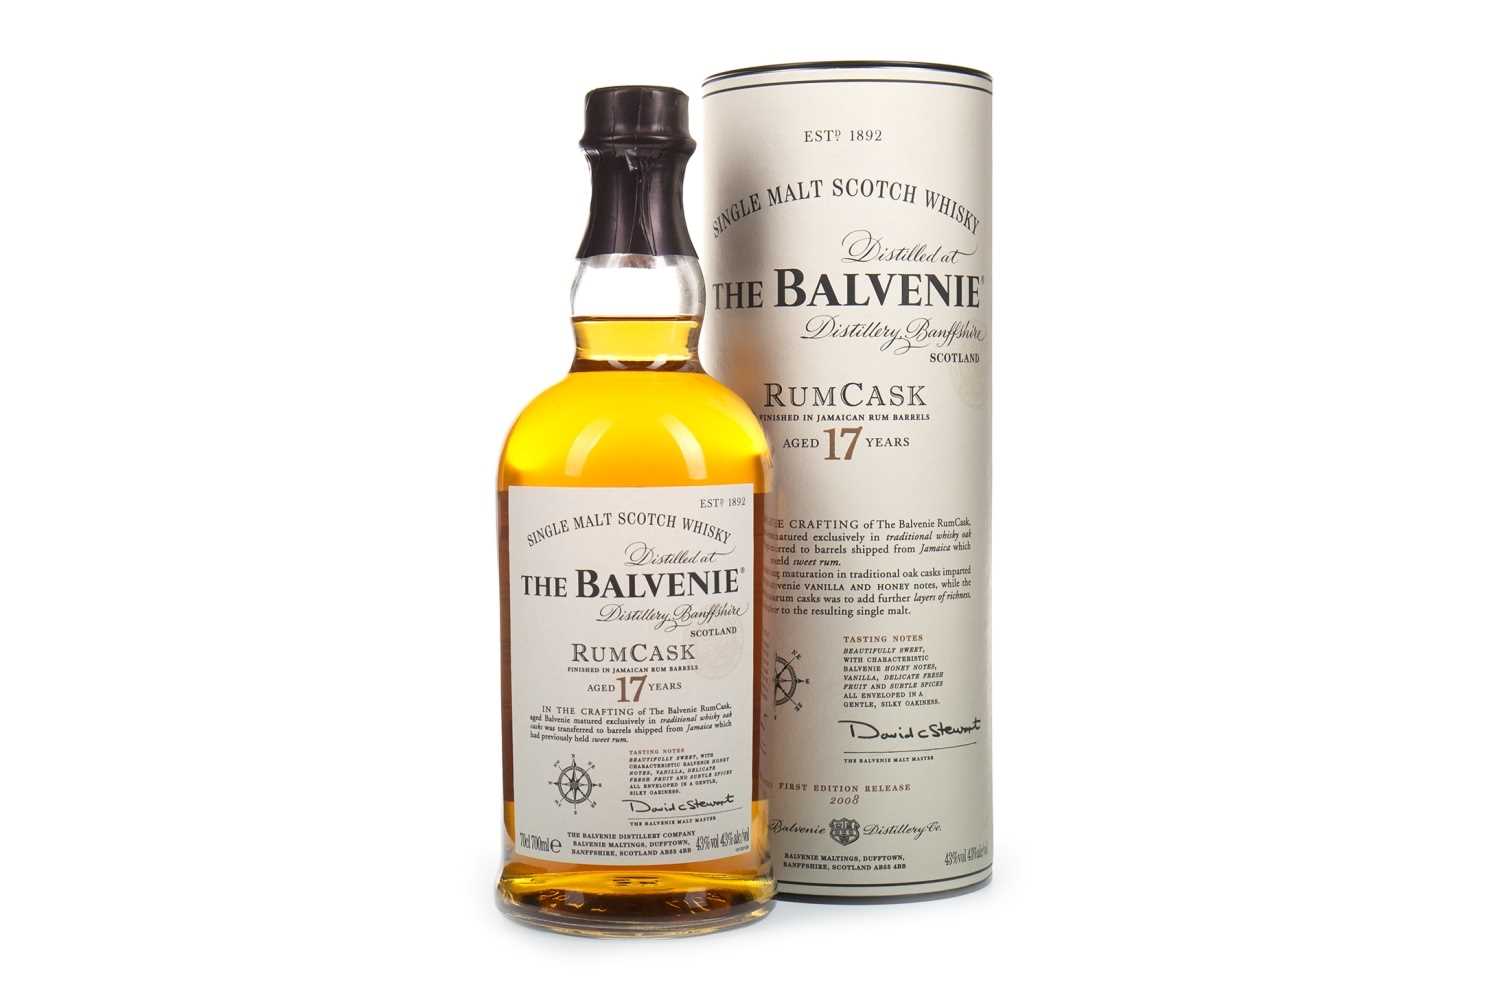 Lot 81 - BALVENIE RUM CASK AGED 17 YEARS - FIRST EDITION